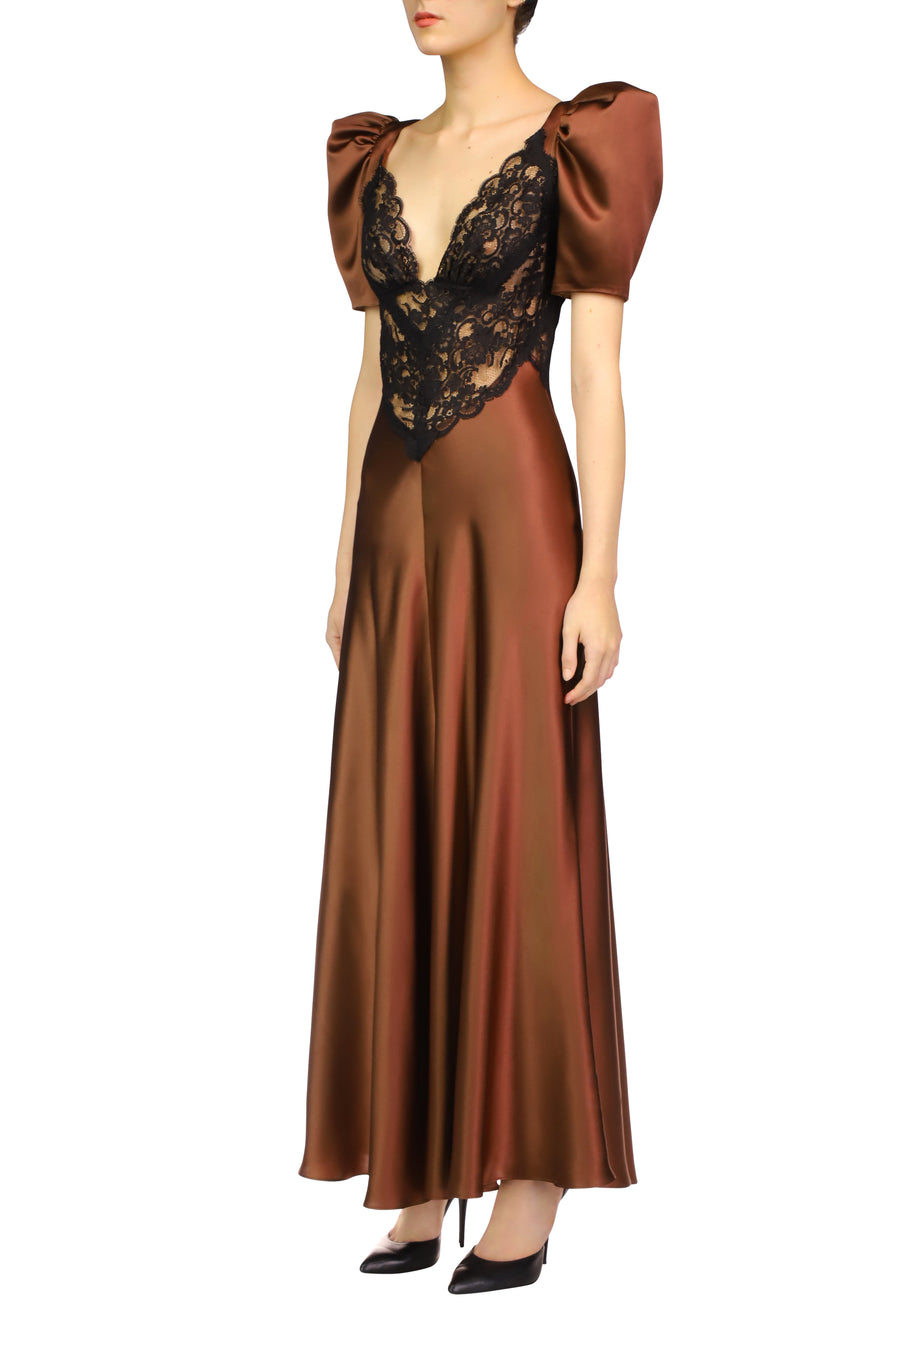 Brown Silk Satin Short Sleeve Dress With Black Lace Details